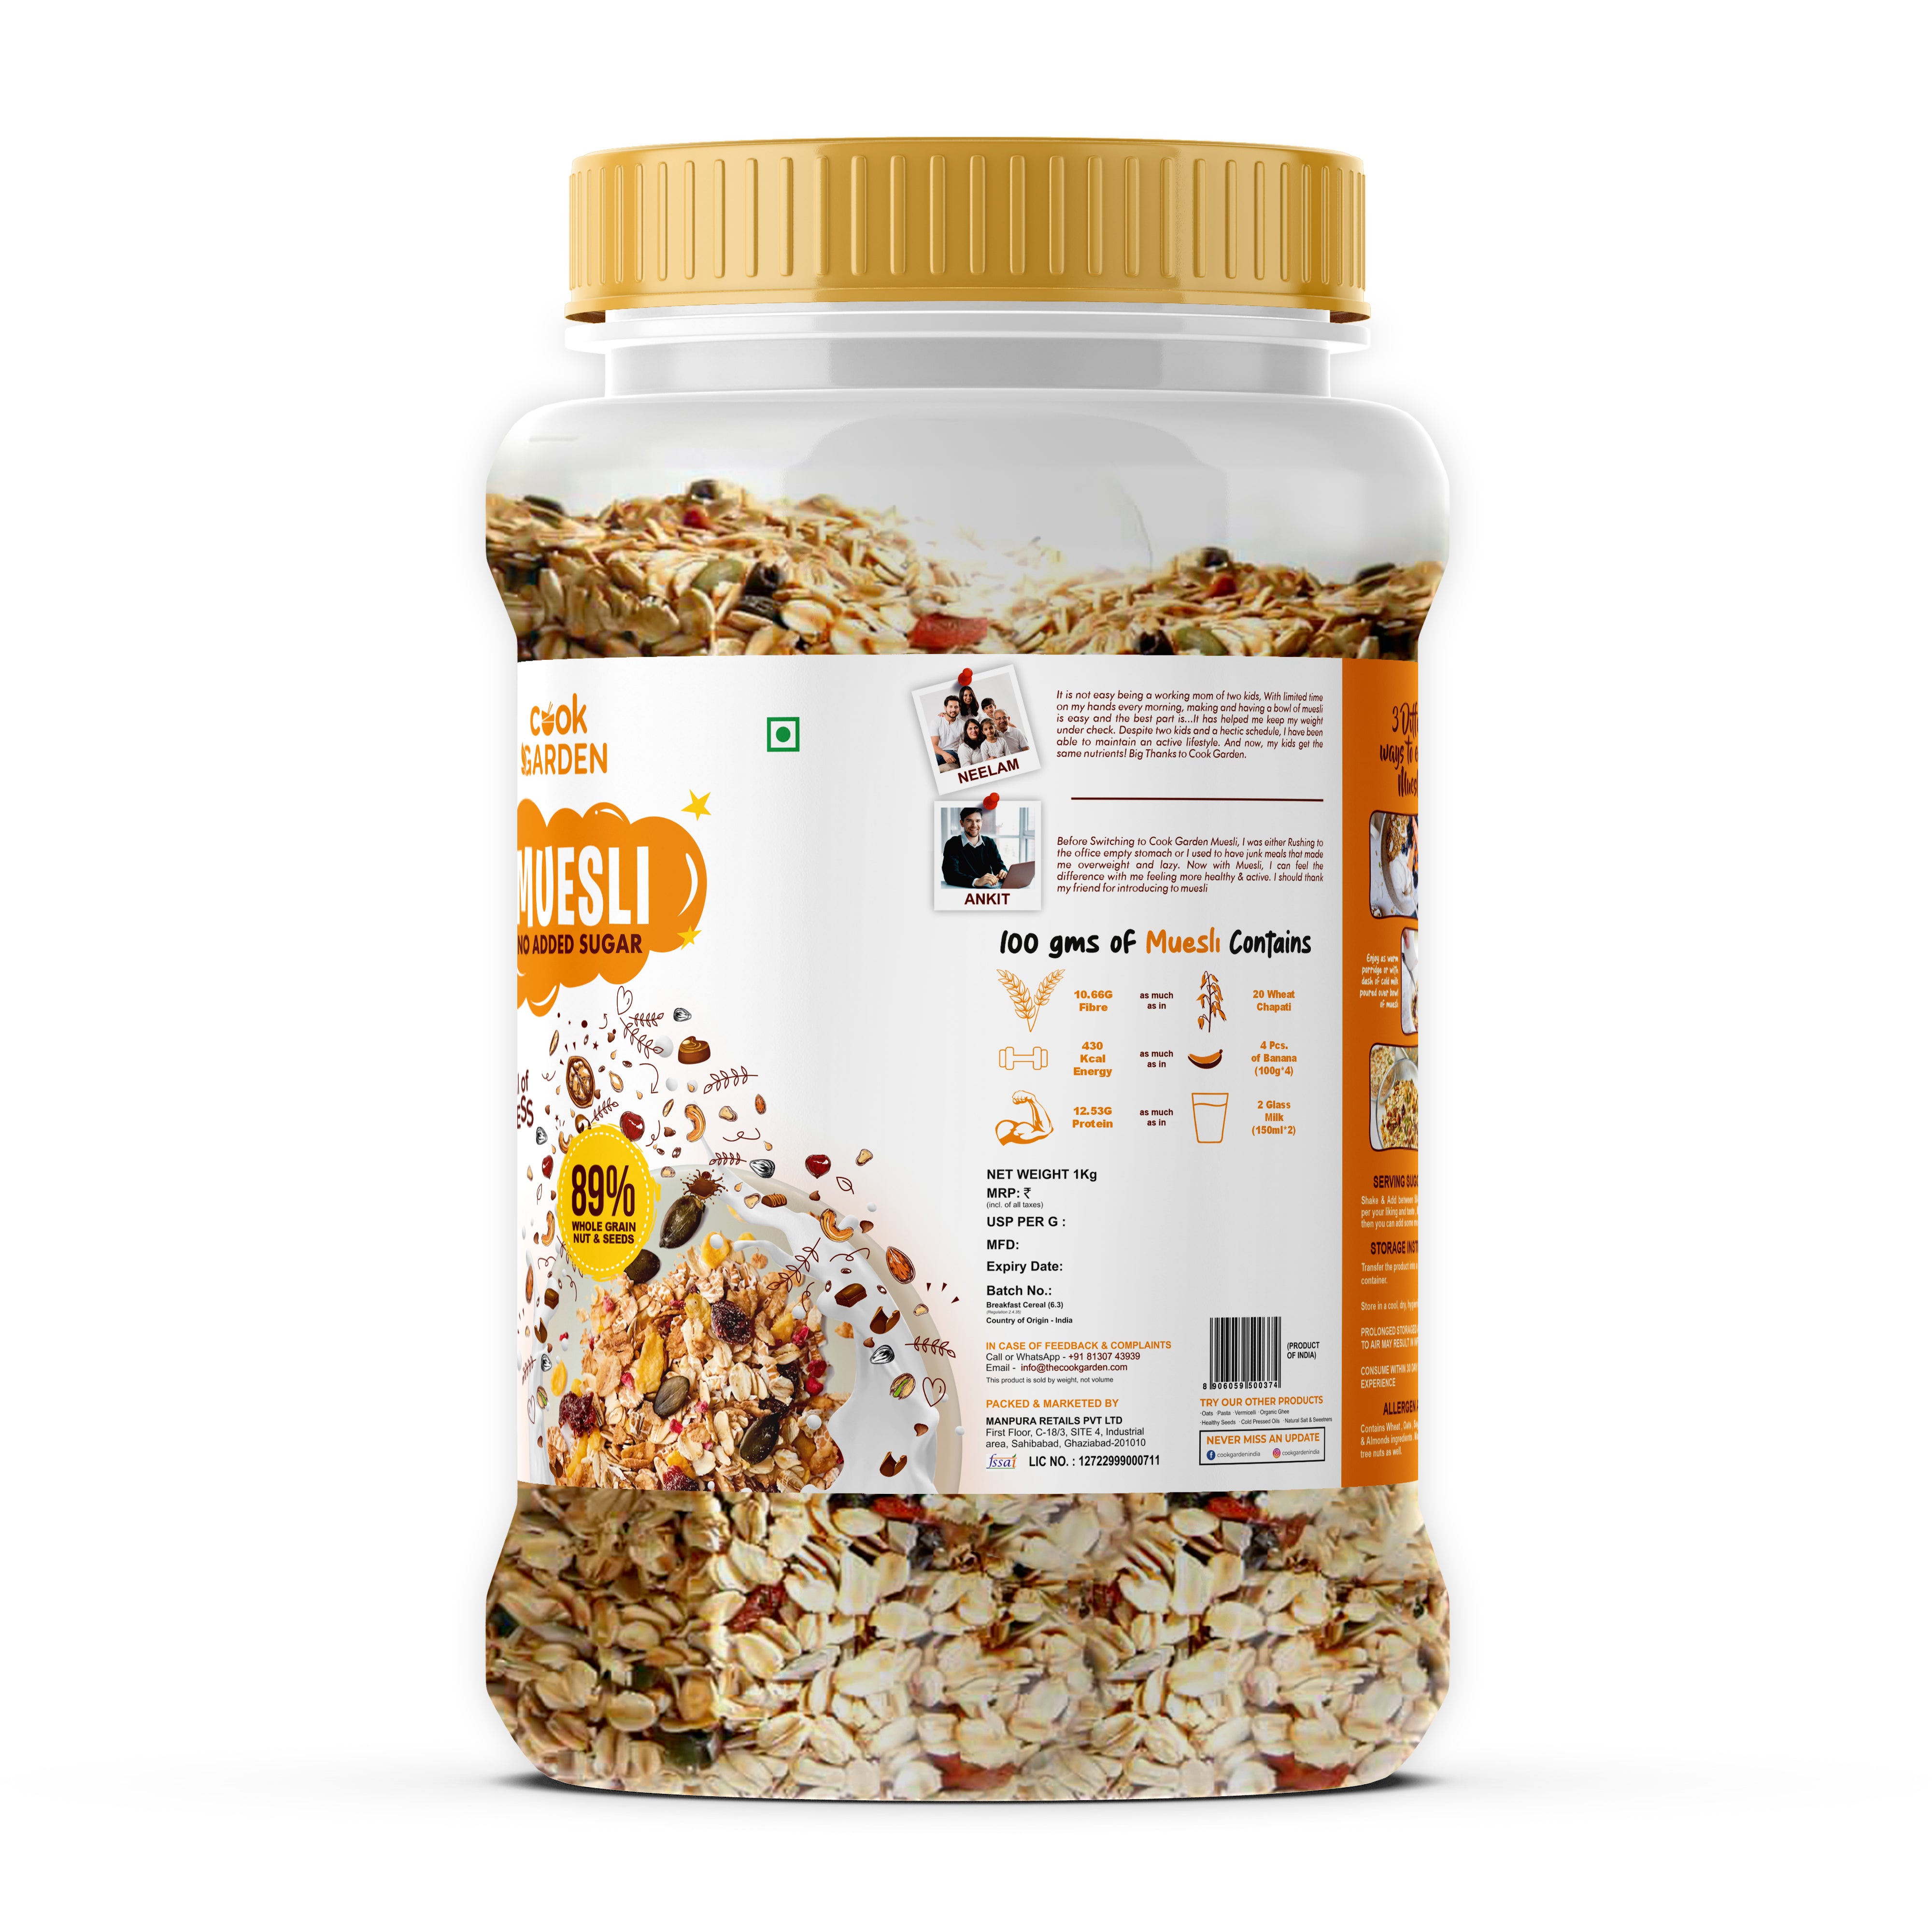 No Added Sugar Muesli 1kg | Breakfast with 89% Whole Grains, Almond+ Seeds | Rich In Fiber, Protein & Energy